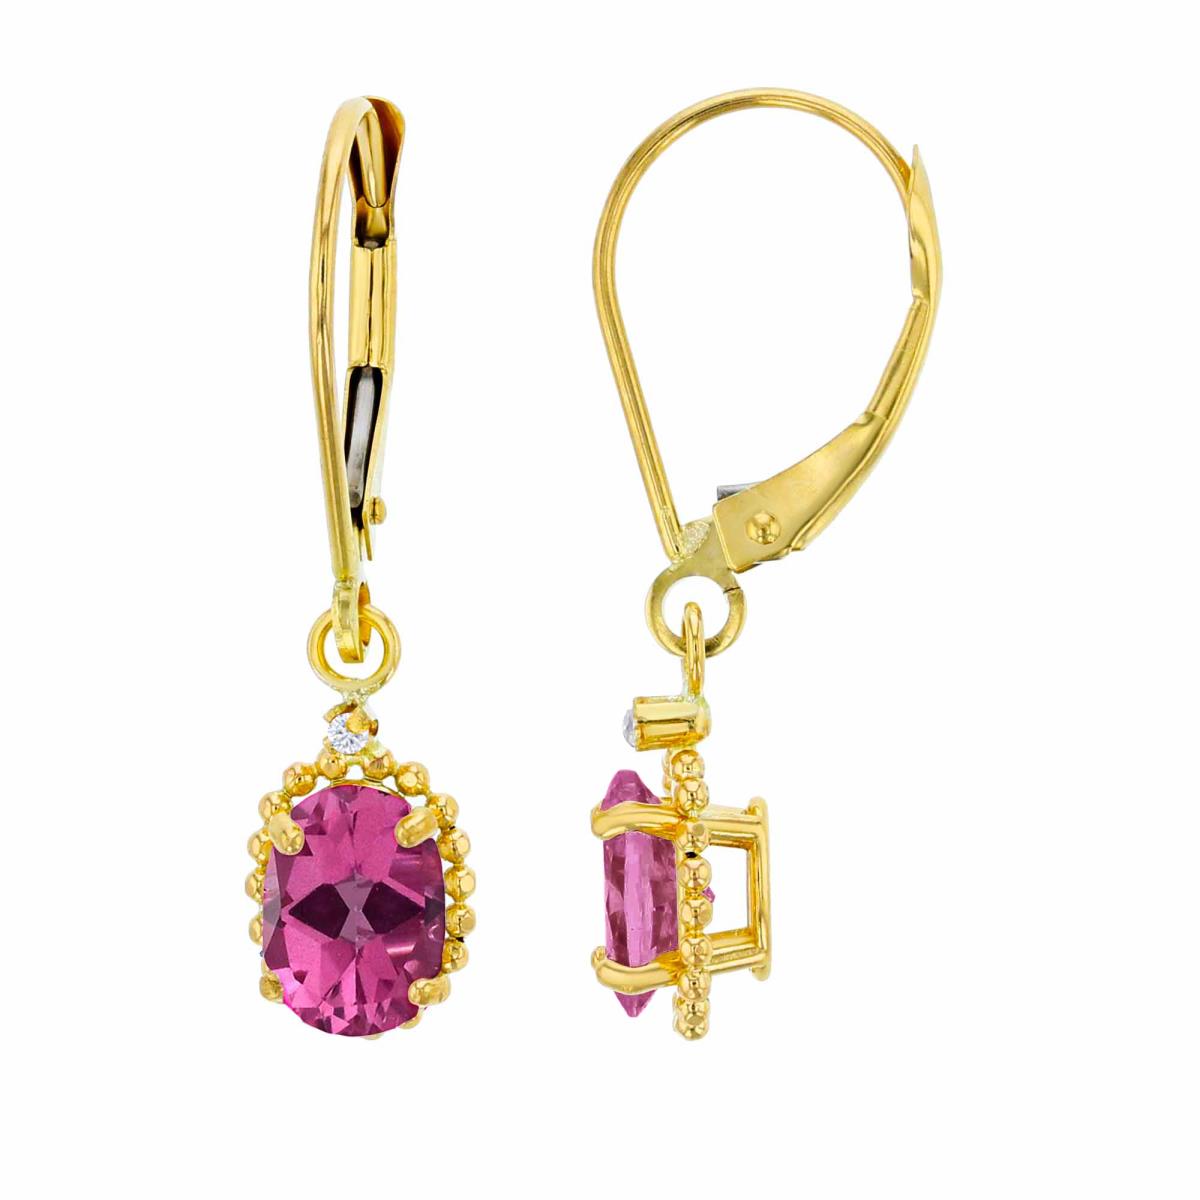 10K Yellow Gold 1.25mm Rd Created White Sapphire & 6x4mm Ov Pure Pink Bead Frame Drop Lever-Back Earring